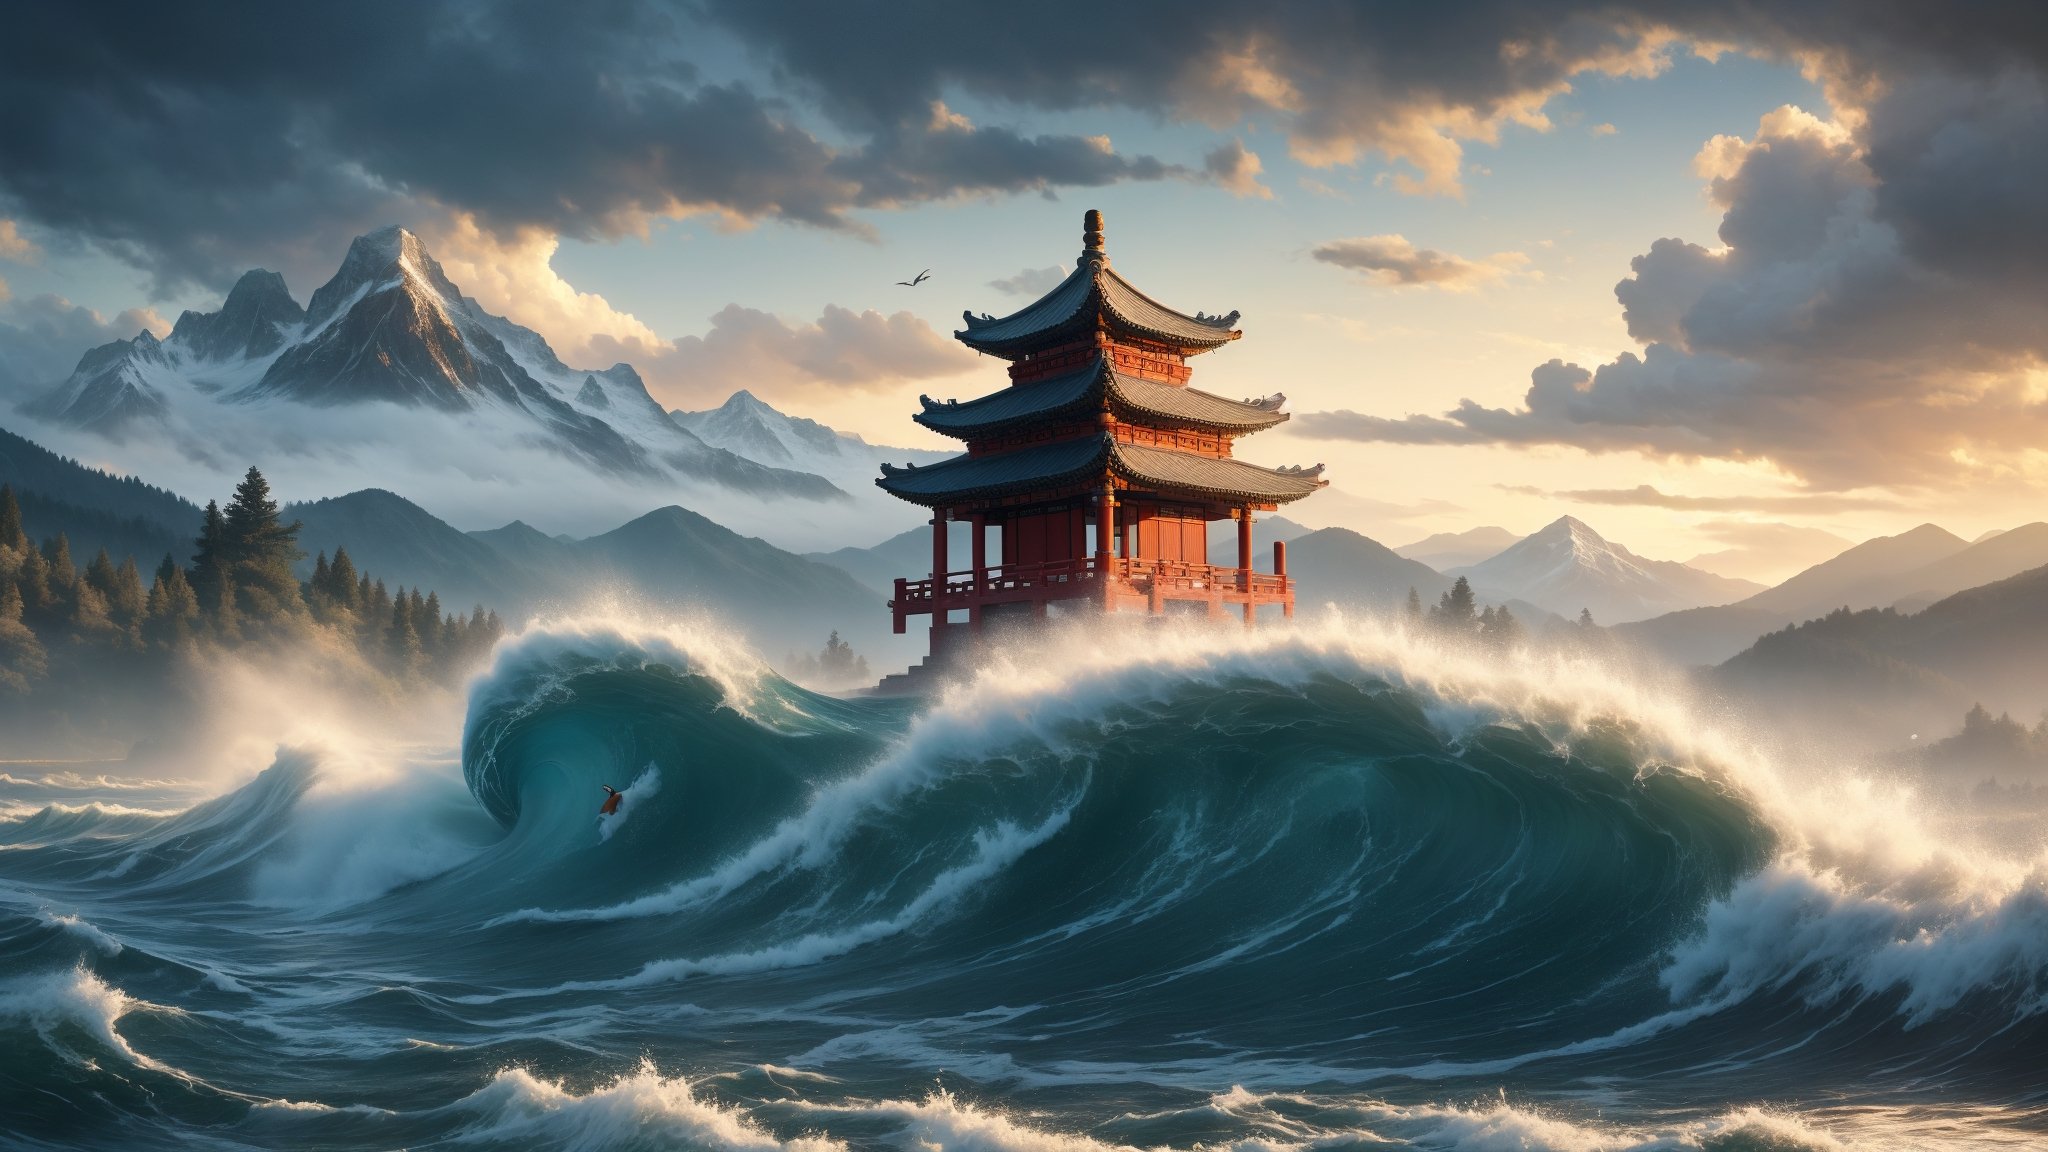 water, foaming, wave, monster, foggy, mountains, Chinese temple, clouds, birds, at Twilight, tilt shift, Cleancore, HDR, Mustafa Abdulhadi, involved in a project, DonM3l3m3nt4l, 